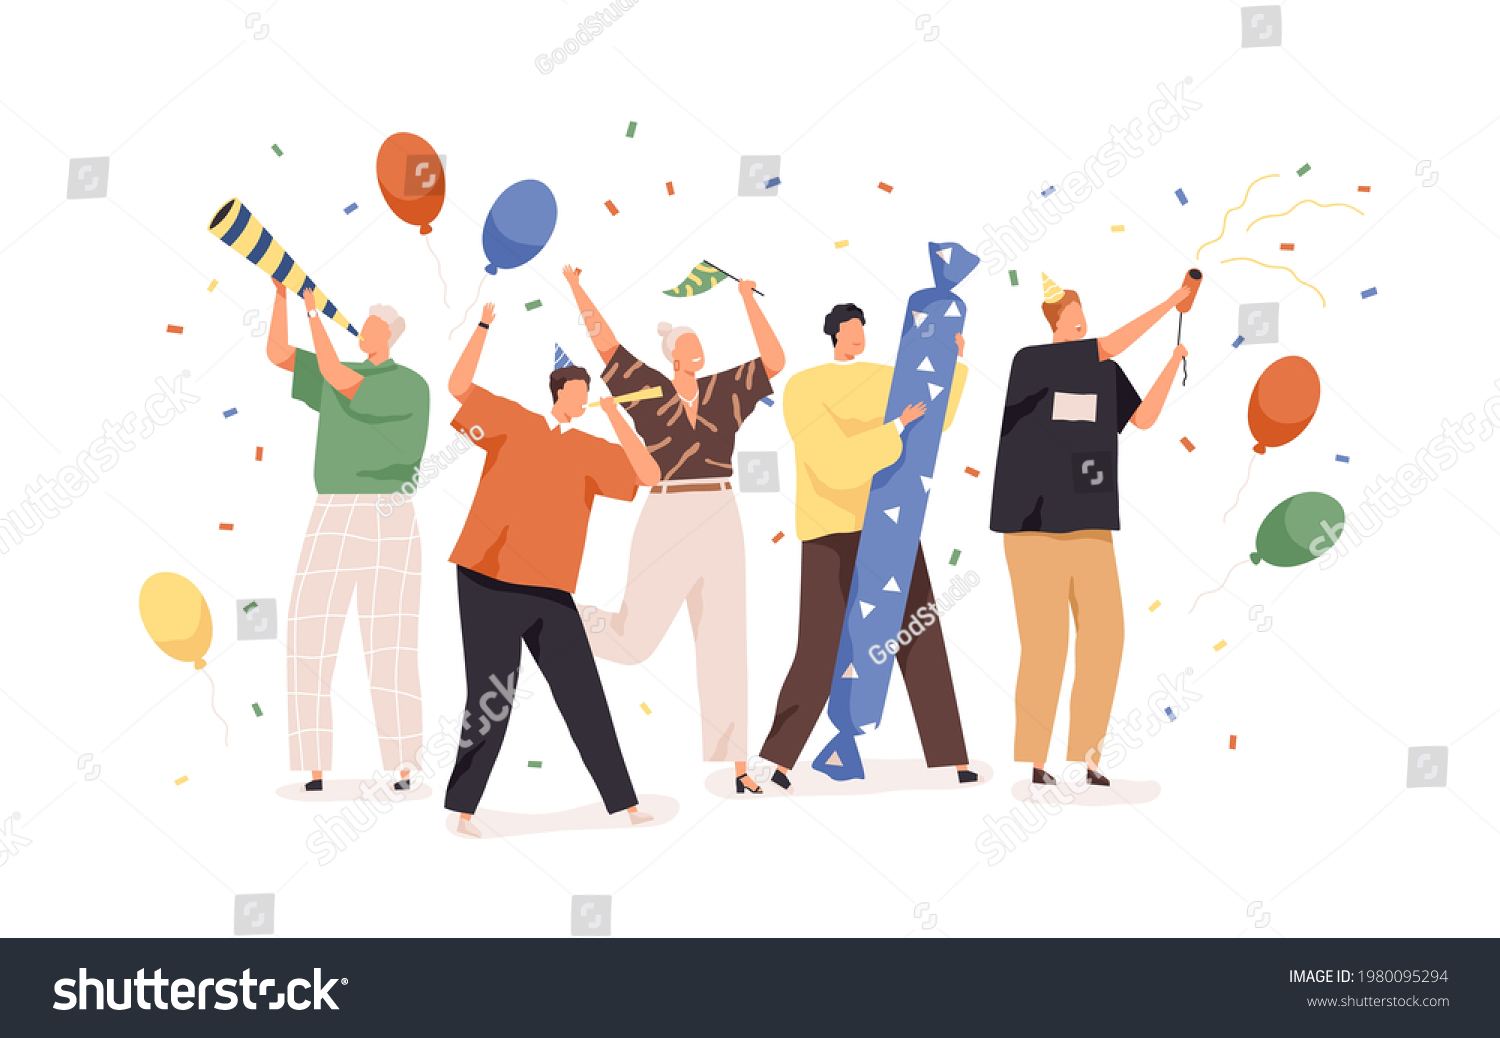 Happy people celebrating birthday with confetti, balloons, party hats and horns. Holiday celebration concept. Men and women rejoicing together. Colored flat vector illustration isolated on white #1980095294